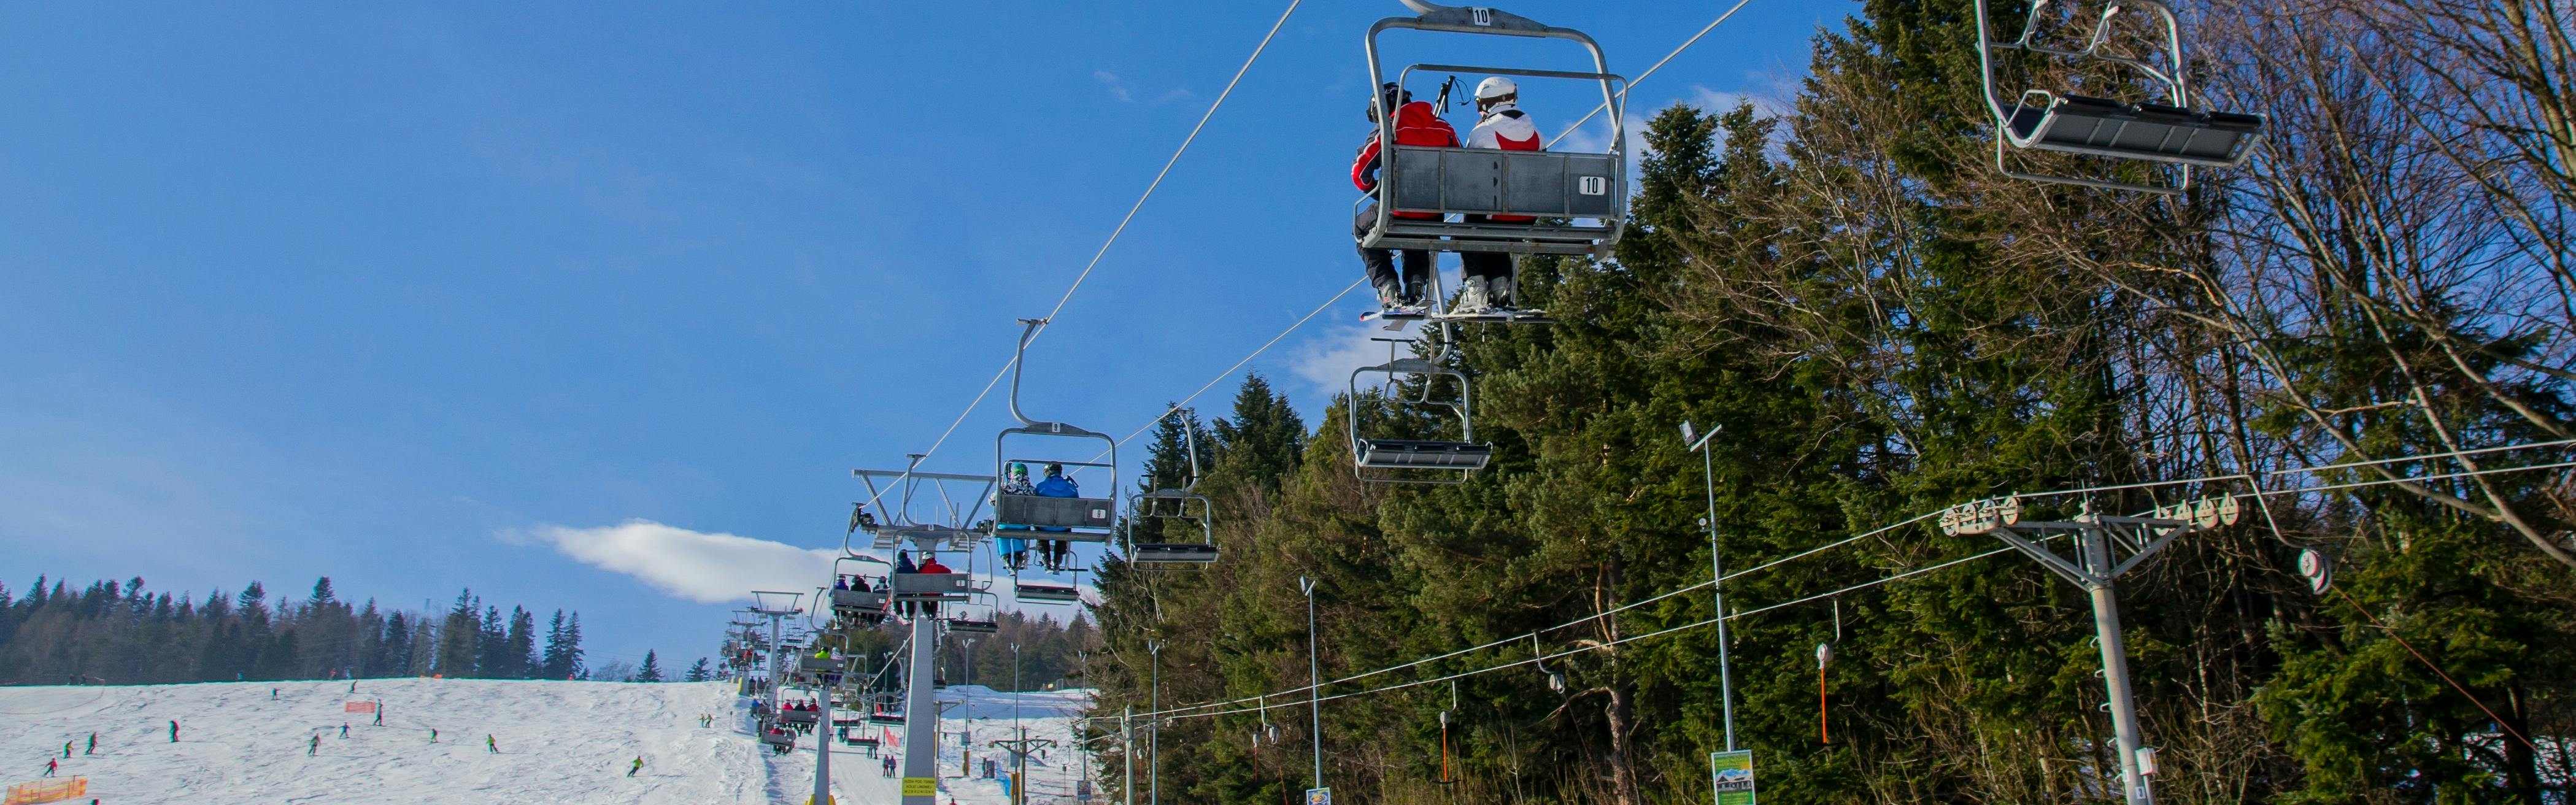 People ride a chairlift up a snowy mountain